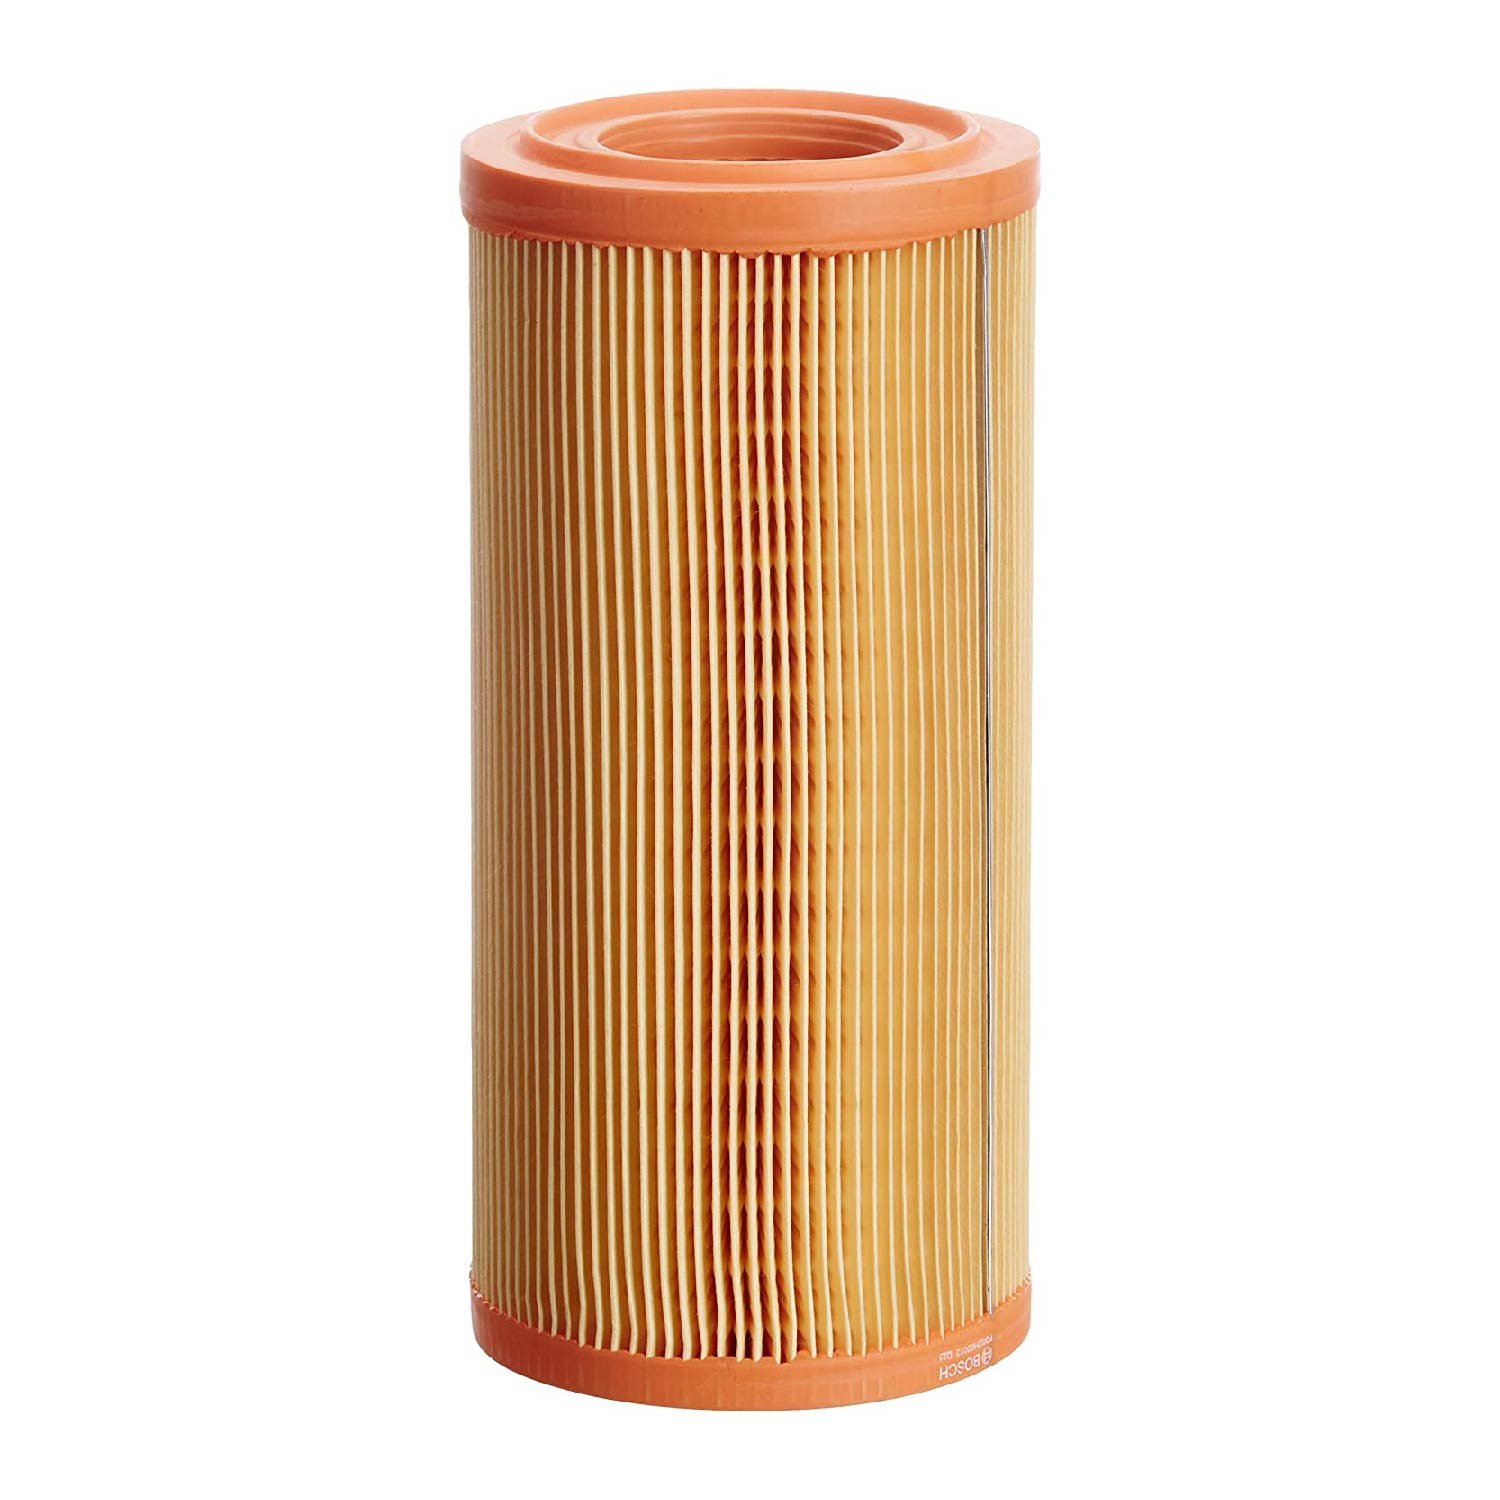 Bosch F002H600128F8 High Performance Paper Replacement Air Filter